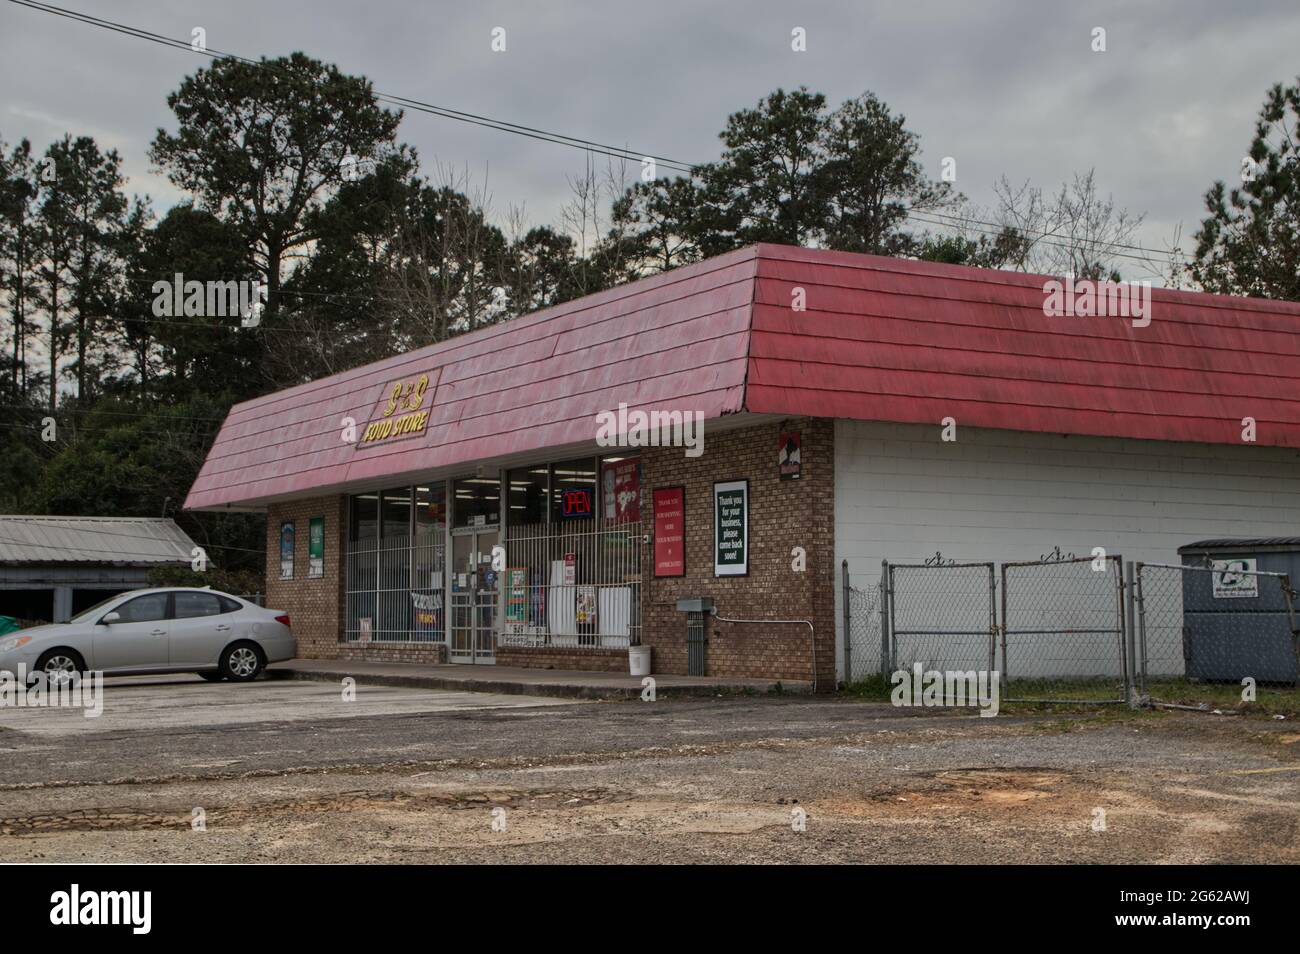 Augusta, Ga USA - 03 06 21: Vintage urban gas station and convenience store old  - Barton Chapel Road Stock Photo